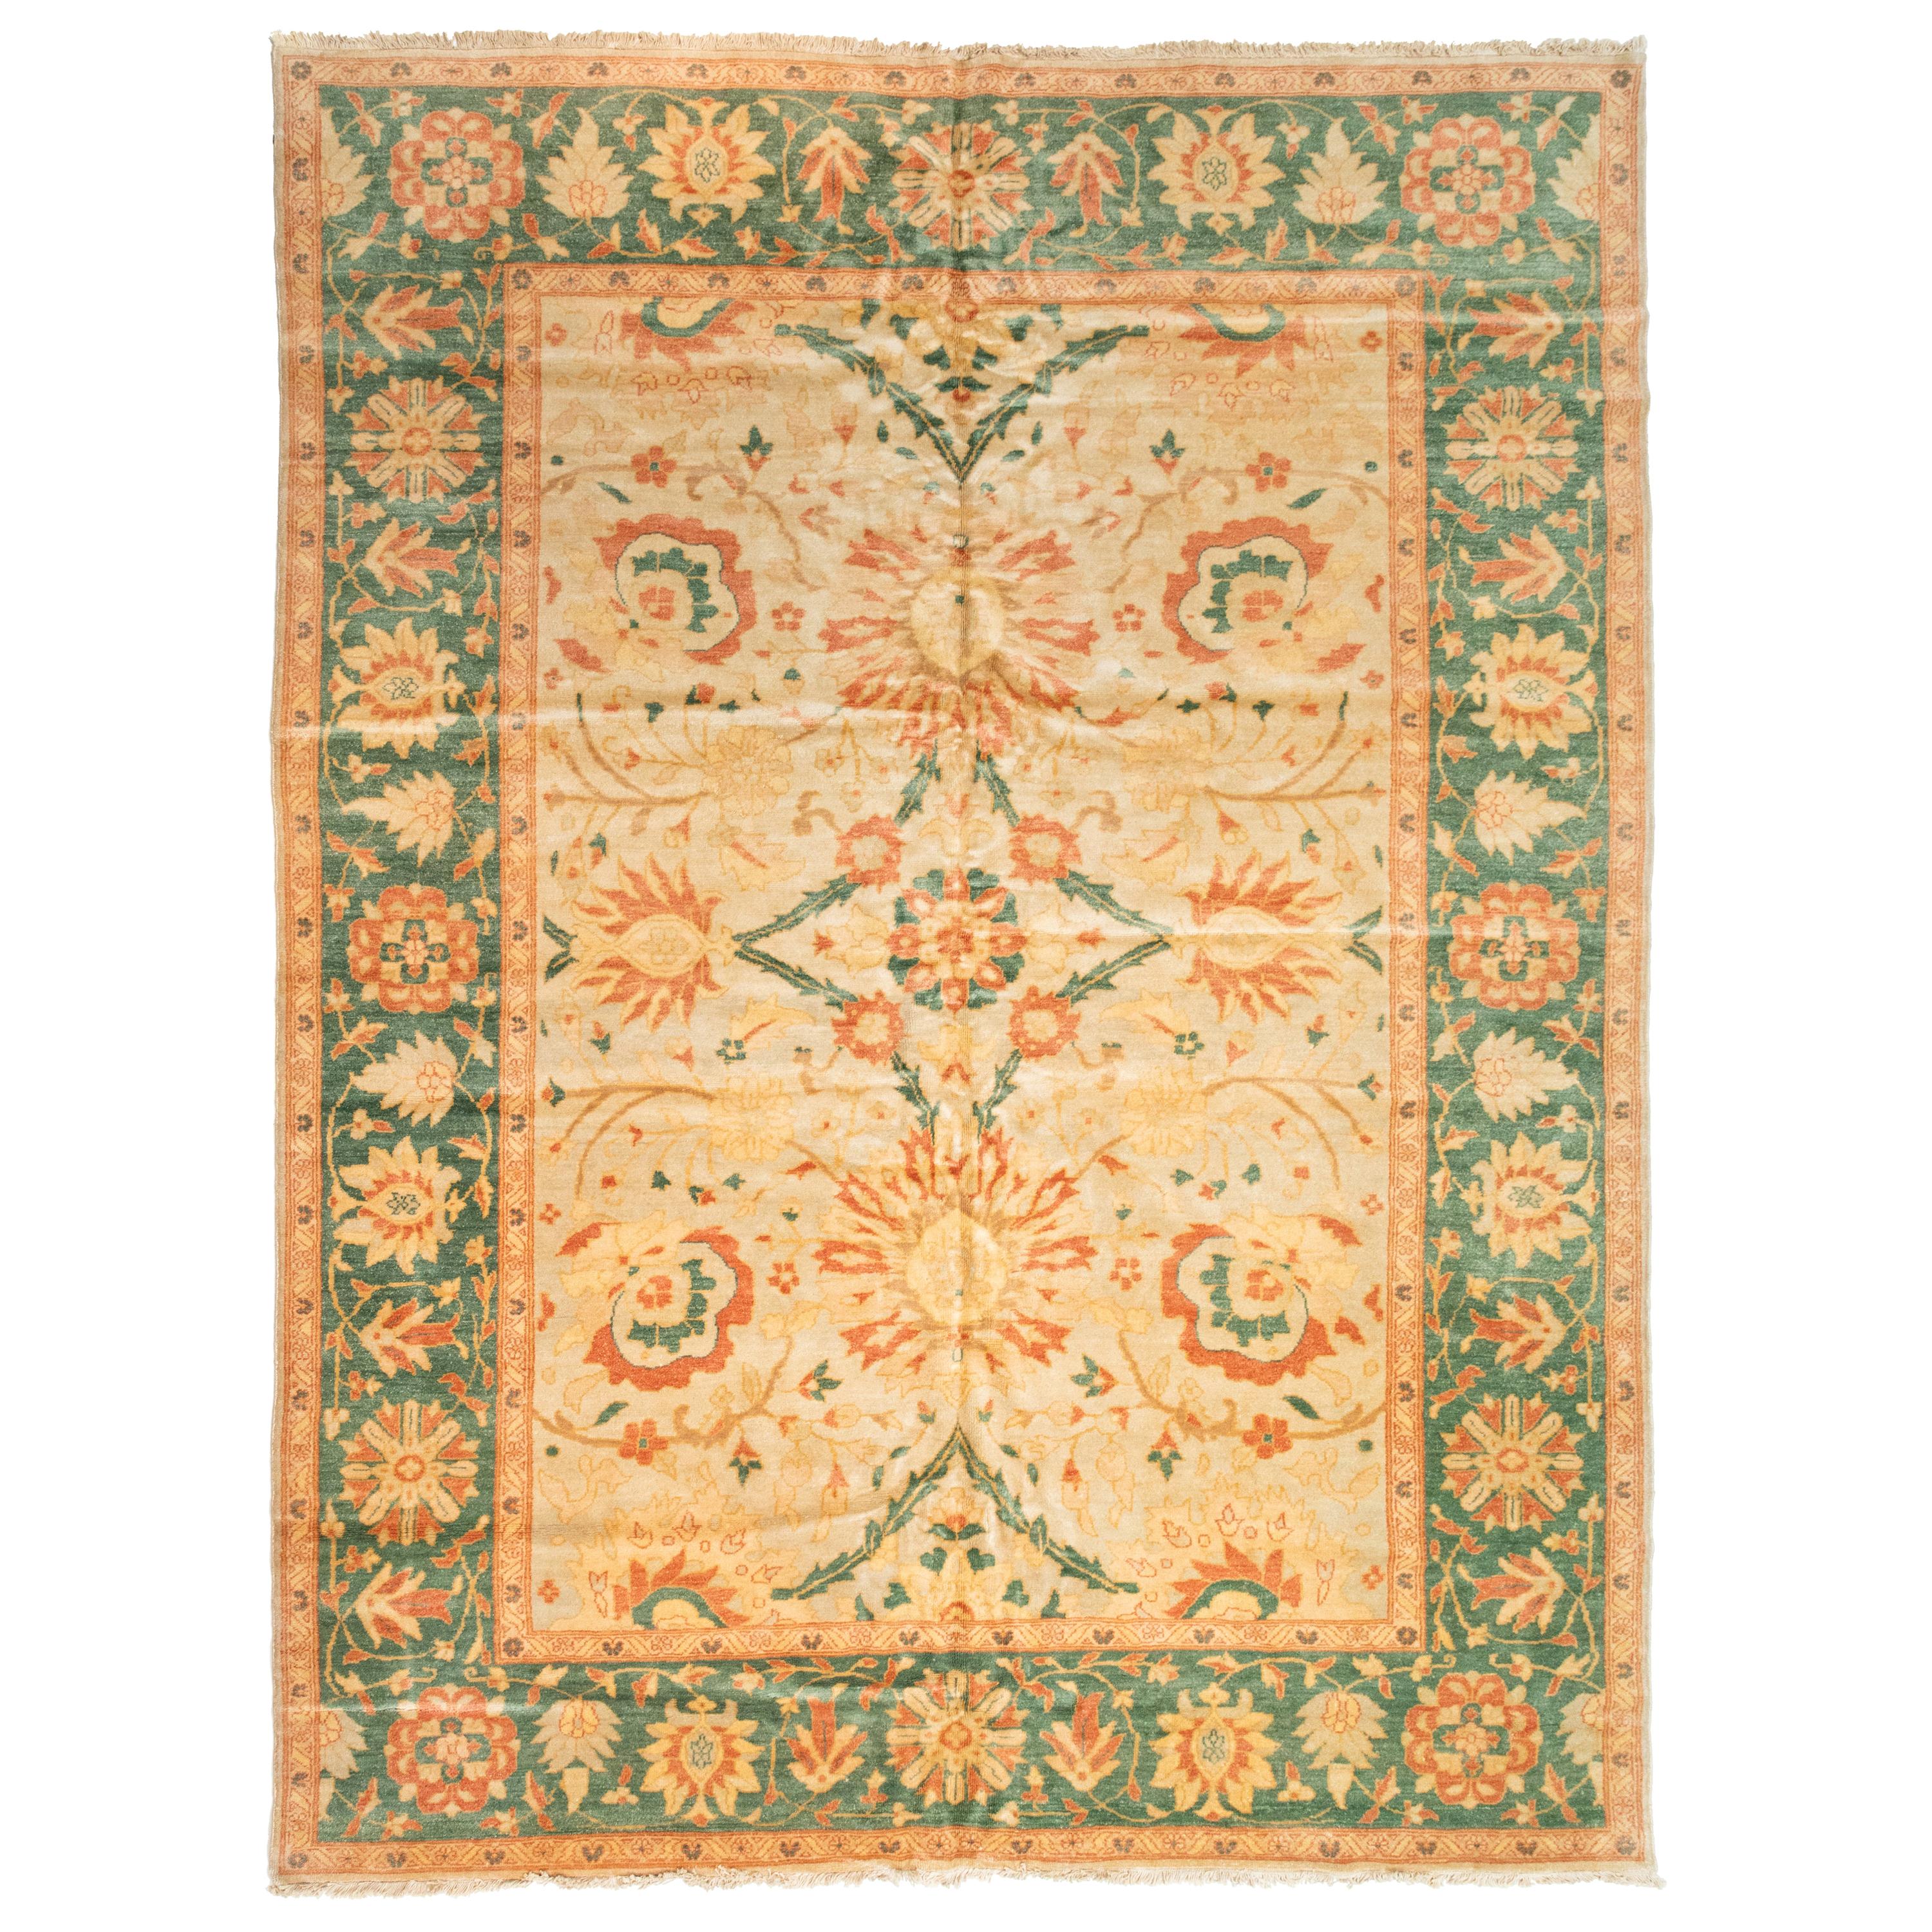 Late 20th Century Large Oversize Green Gold Ivory Persian Design Area Rug